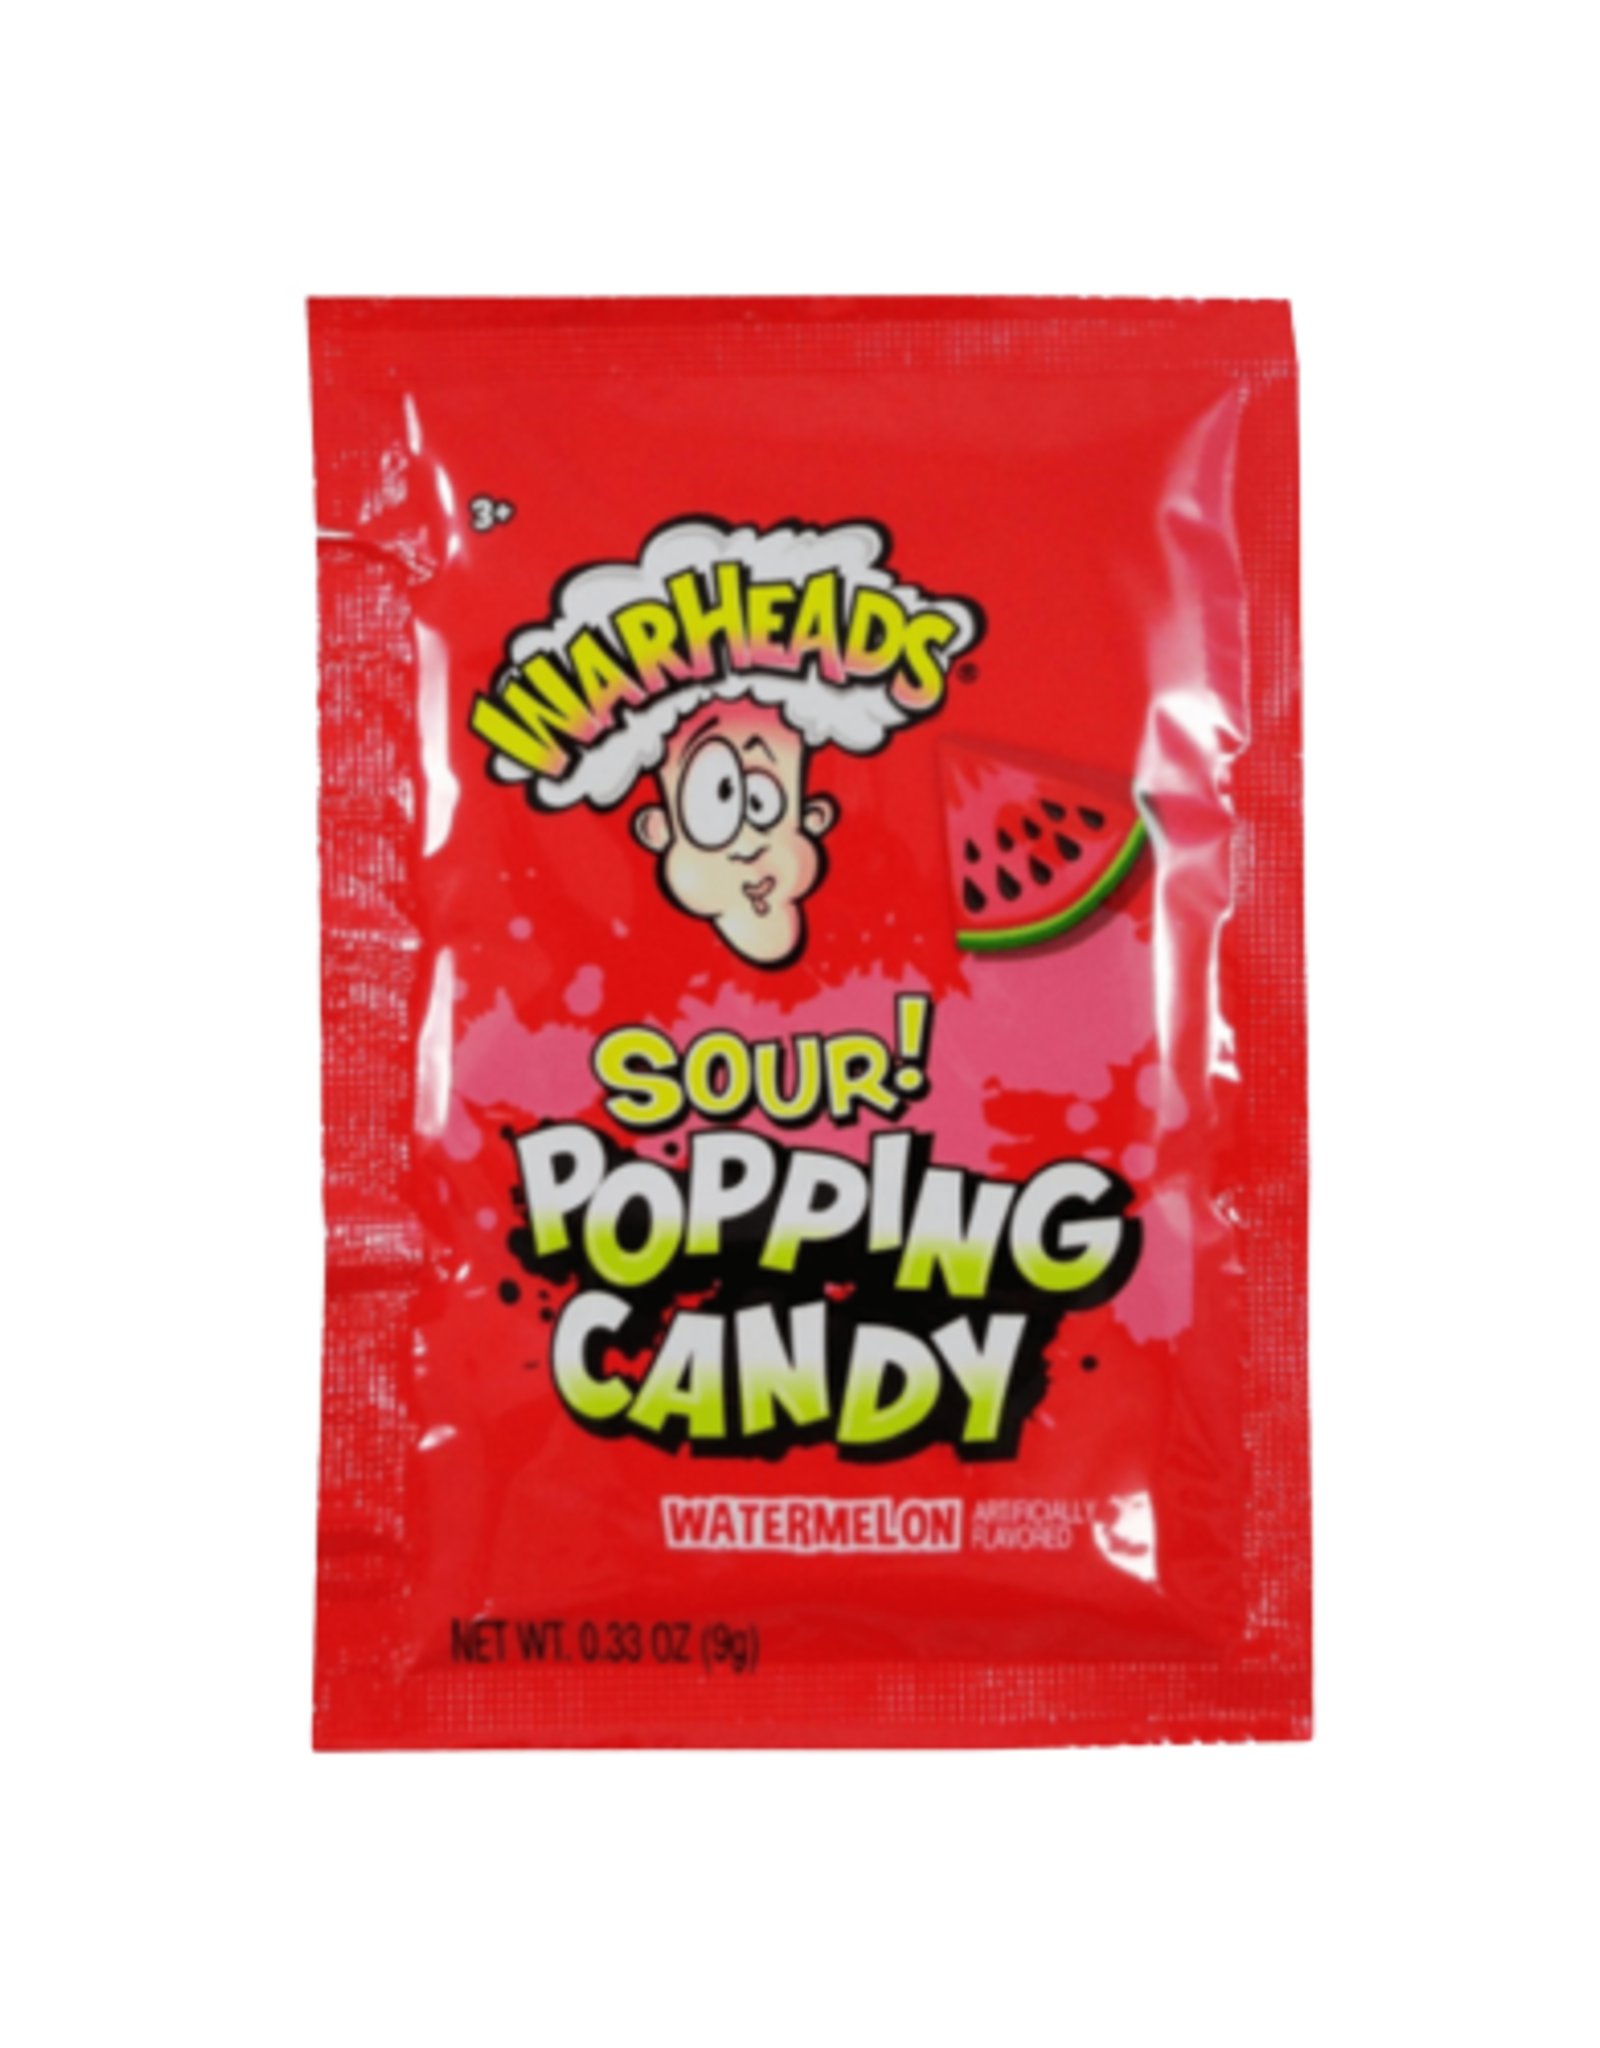 Warheads Popping Candy Sour Watermelon